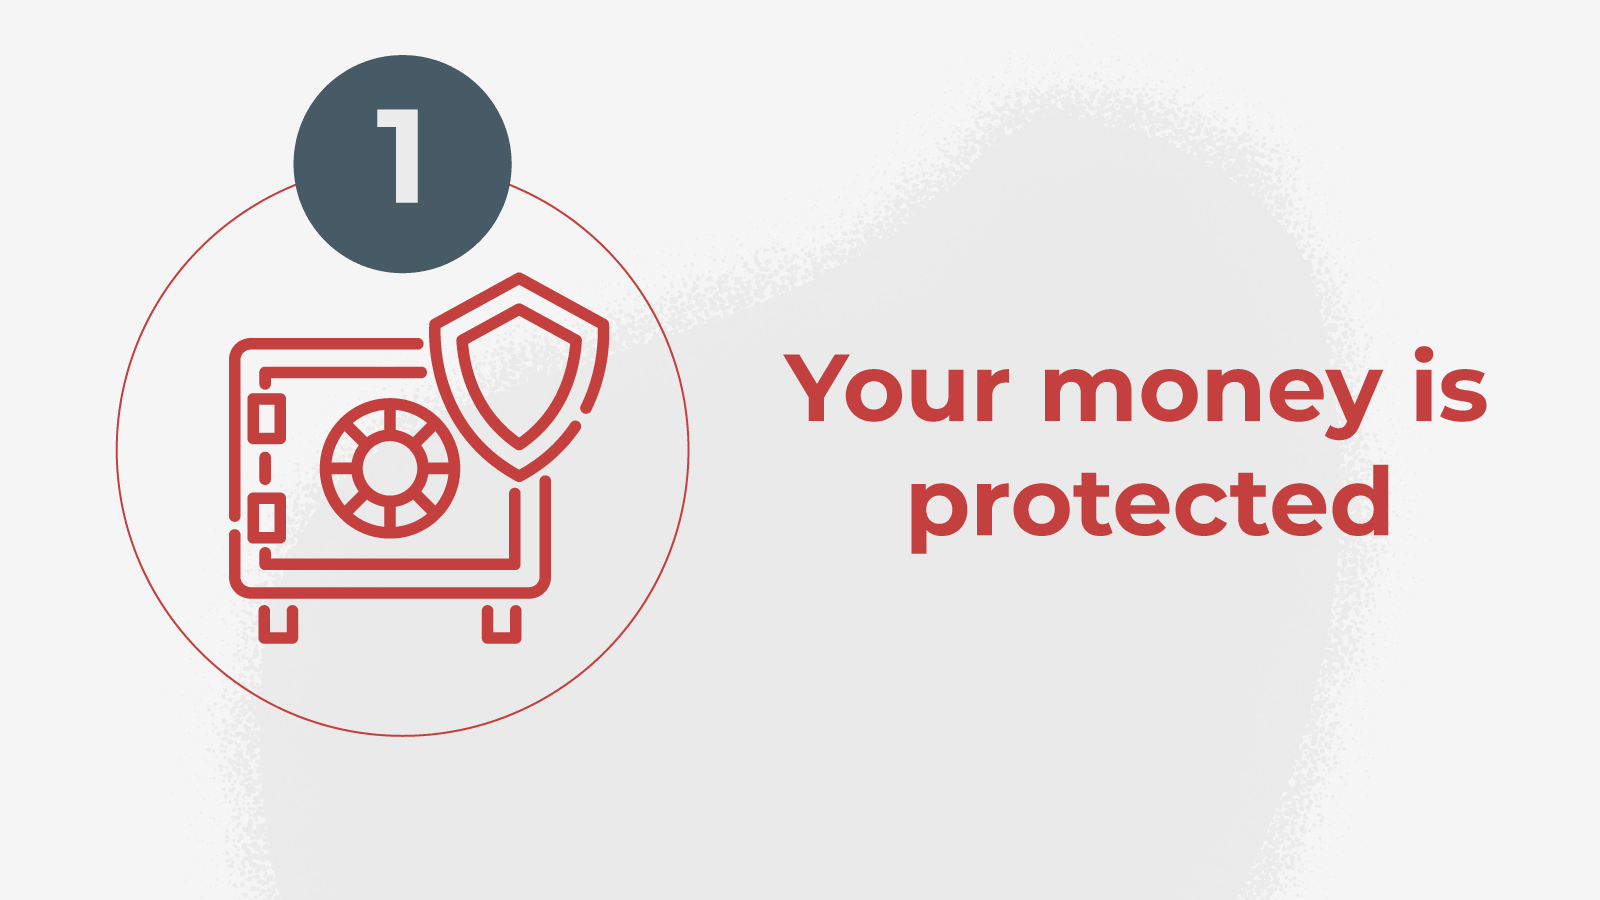 1.Your money is protected